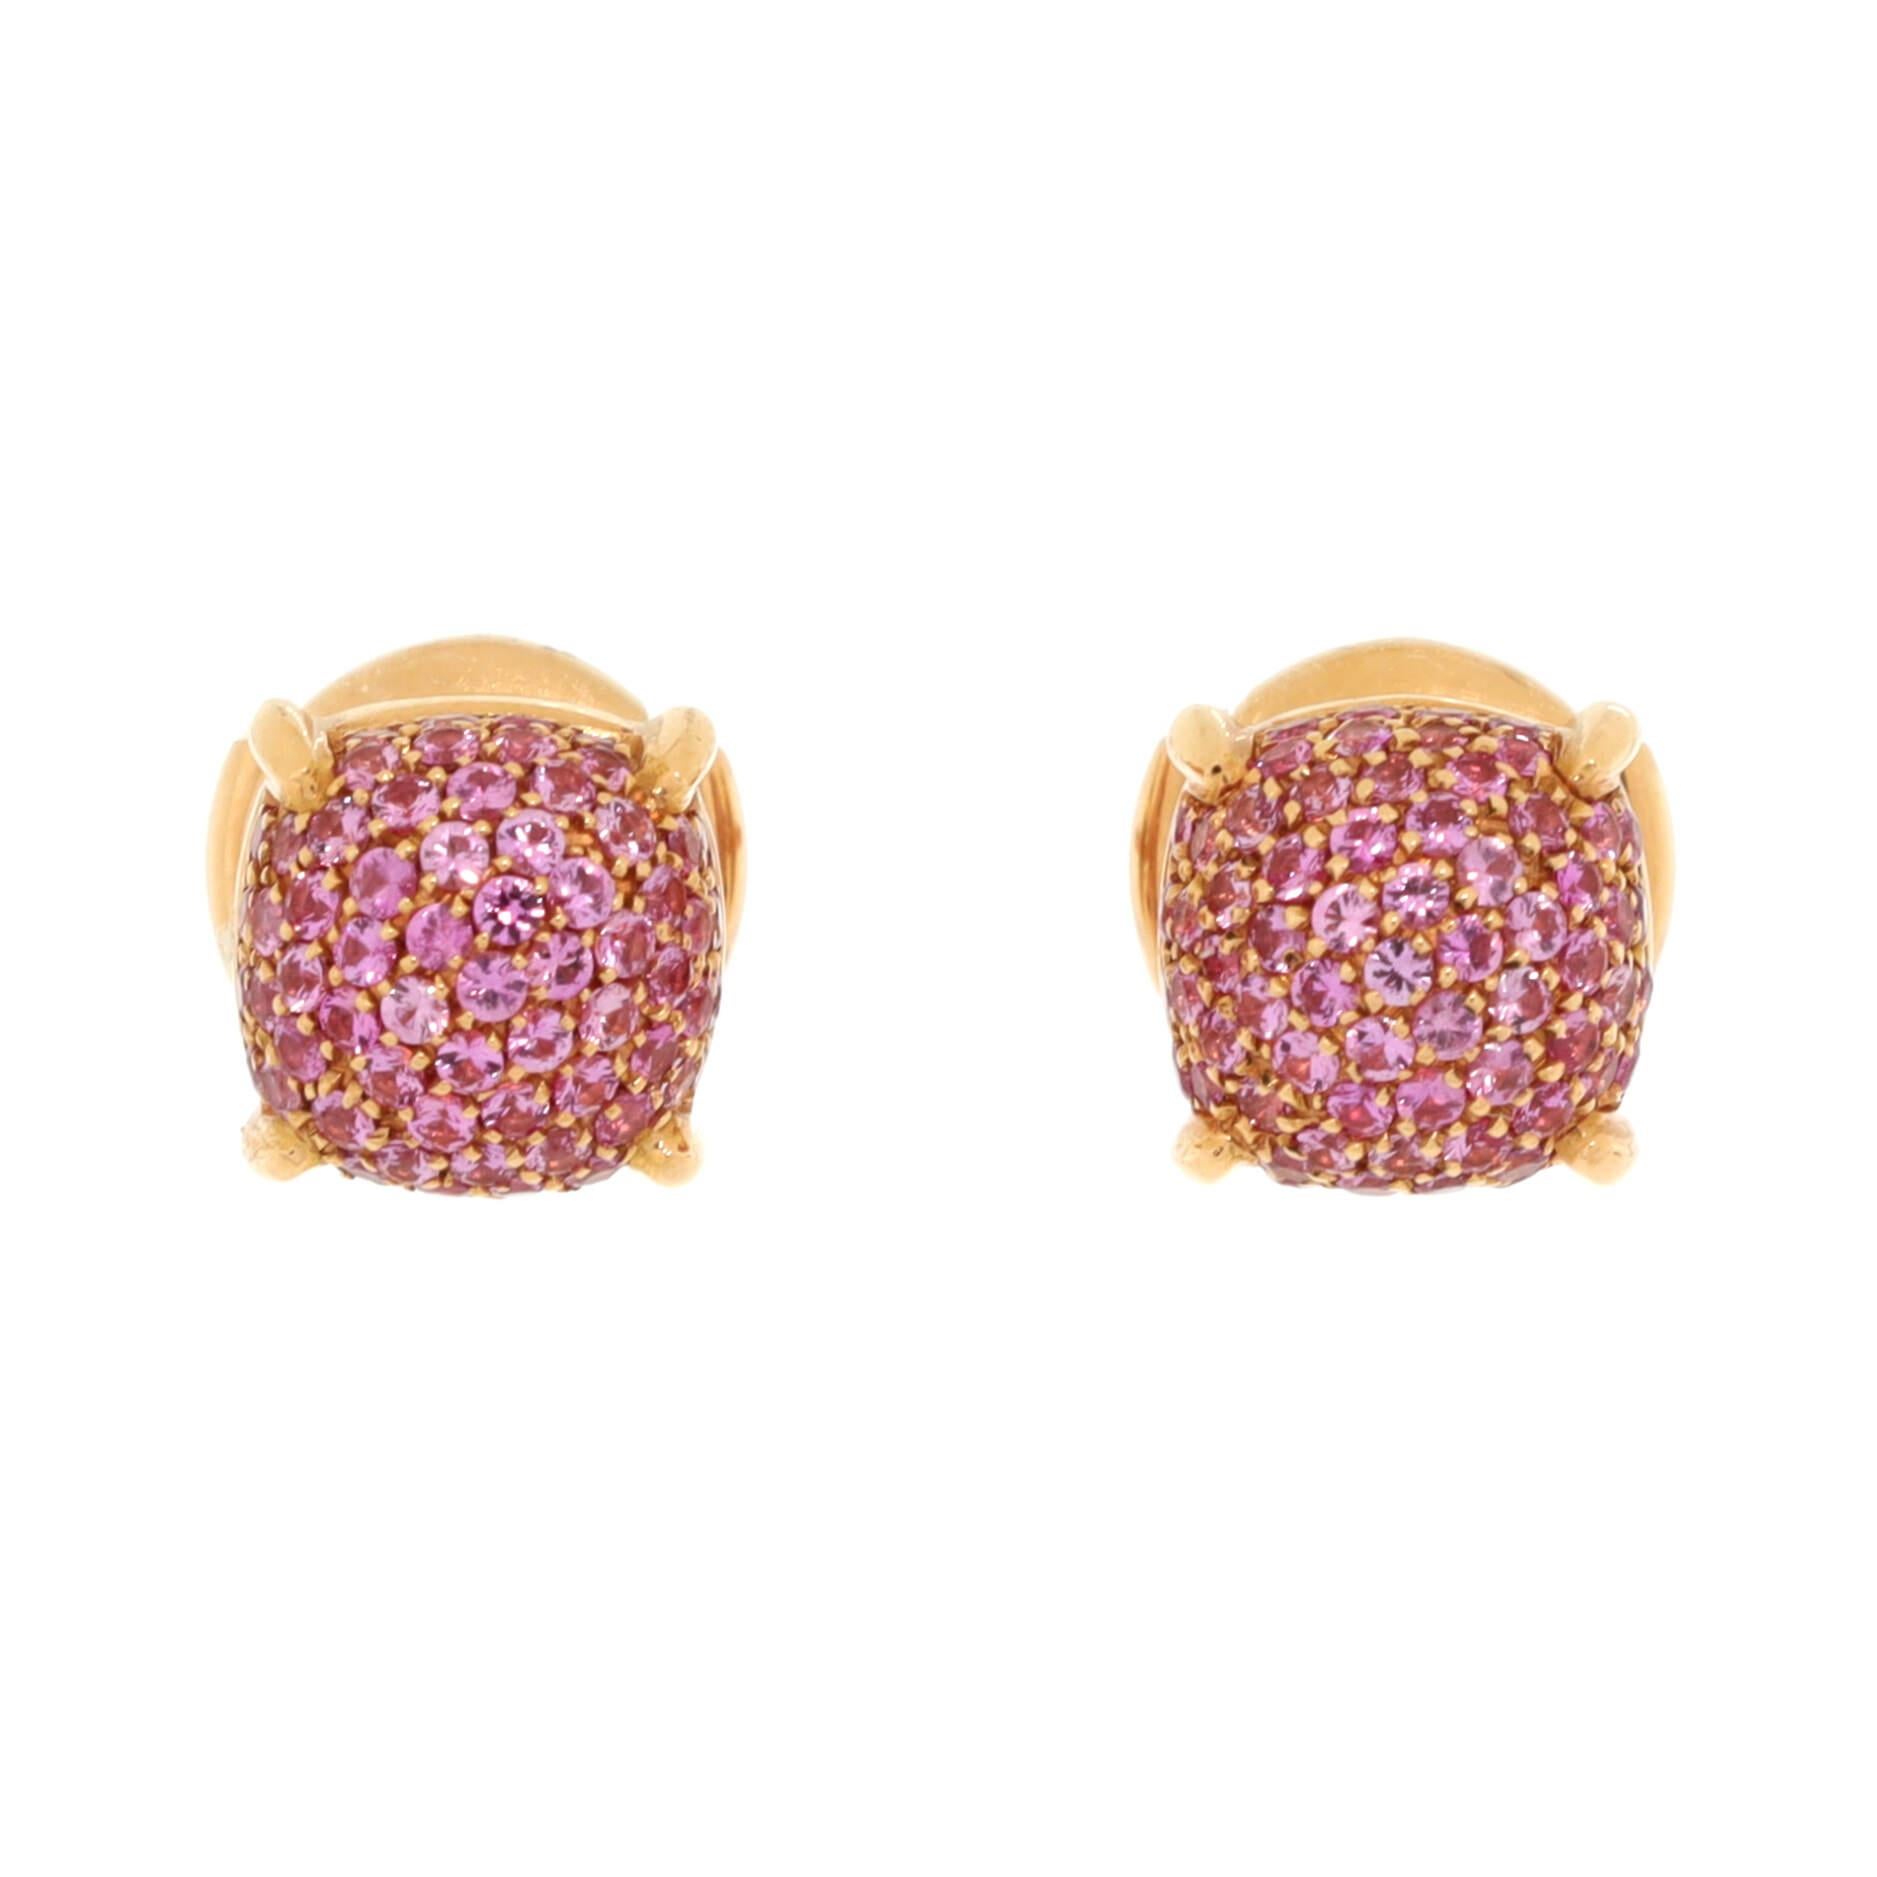 Condition: Excellent. Faint wear throughout.
Accessories: No Accessories
Measurements: Height/Length: 7.20 mm, Width: 7.20 mm
Designer: Tiffany & Co.
Model: Paloma Picasso Sugar Stacks Stud Earrings 18K Rose Gold with Pink Sapphires
Exterior Color: